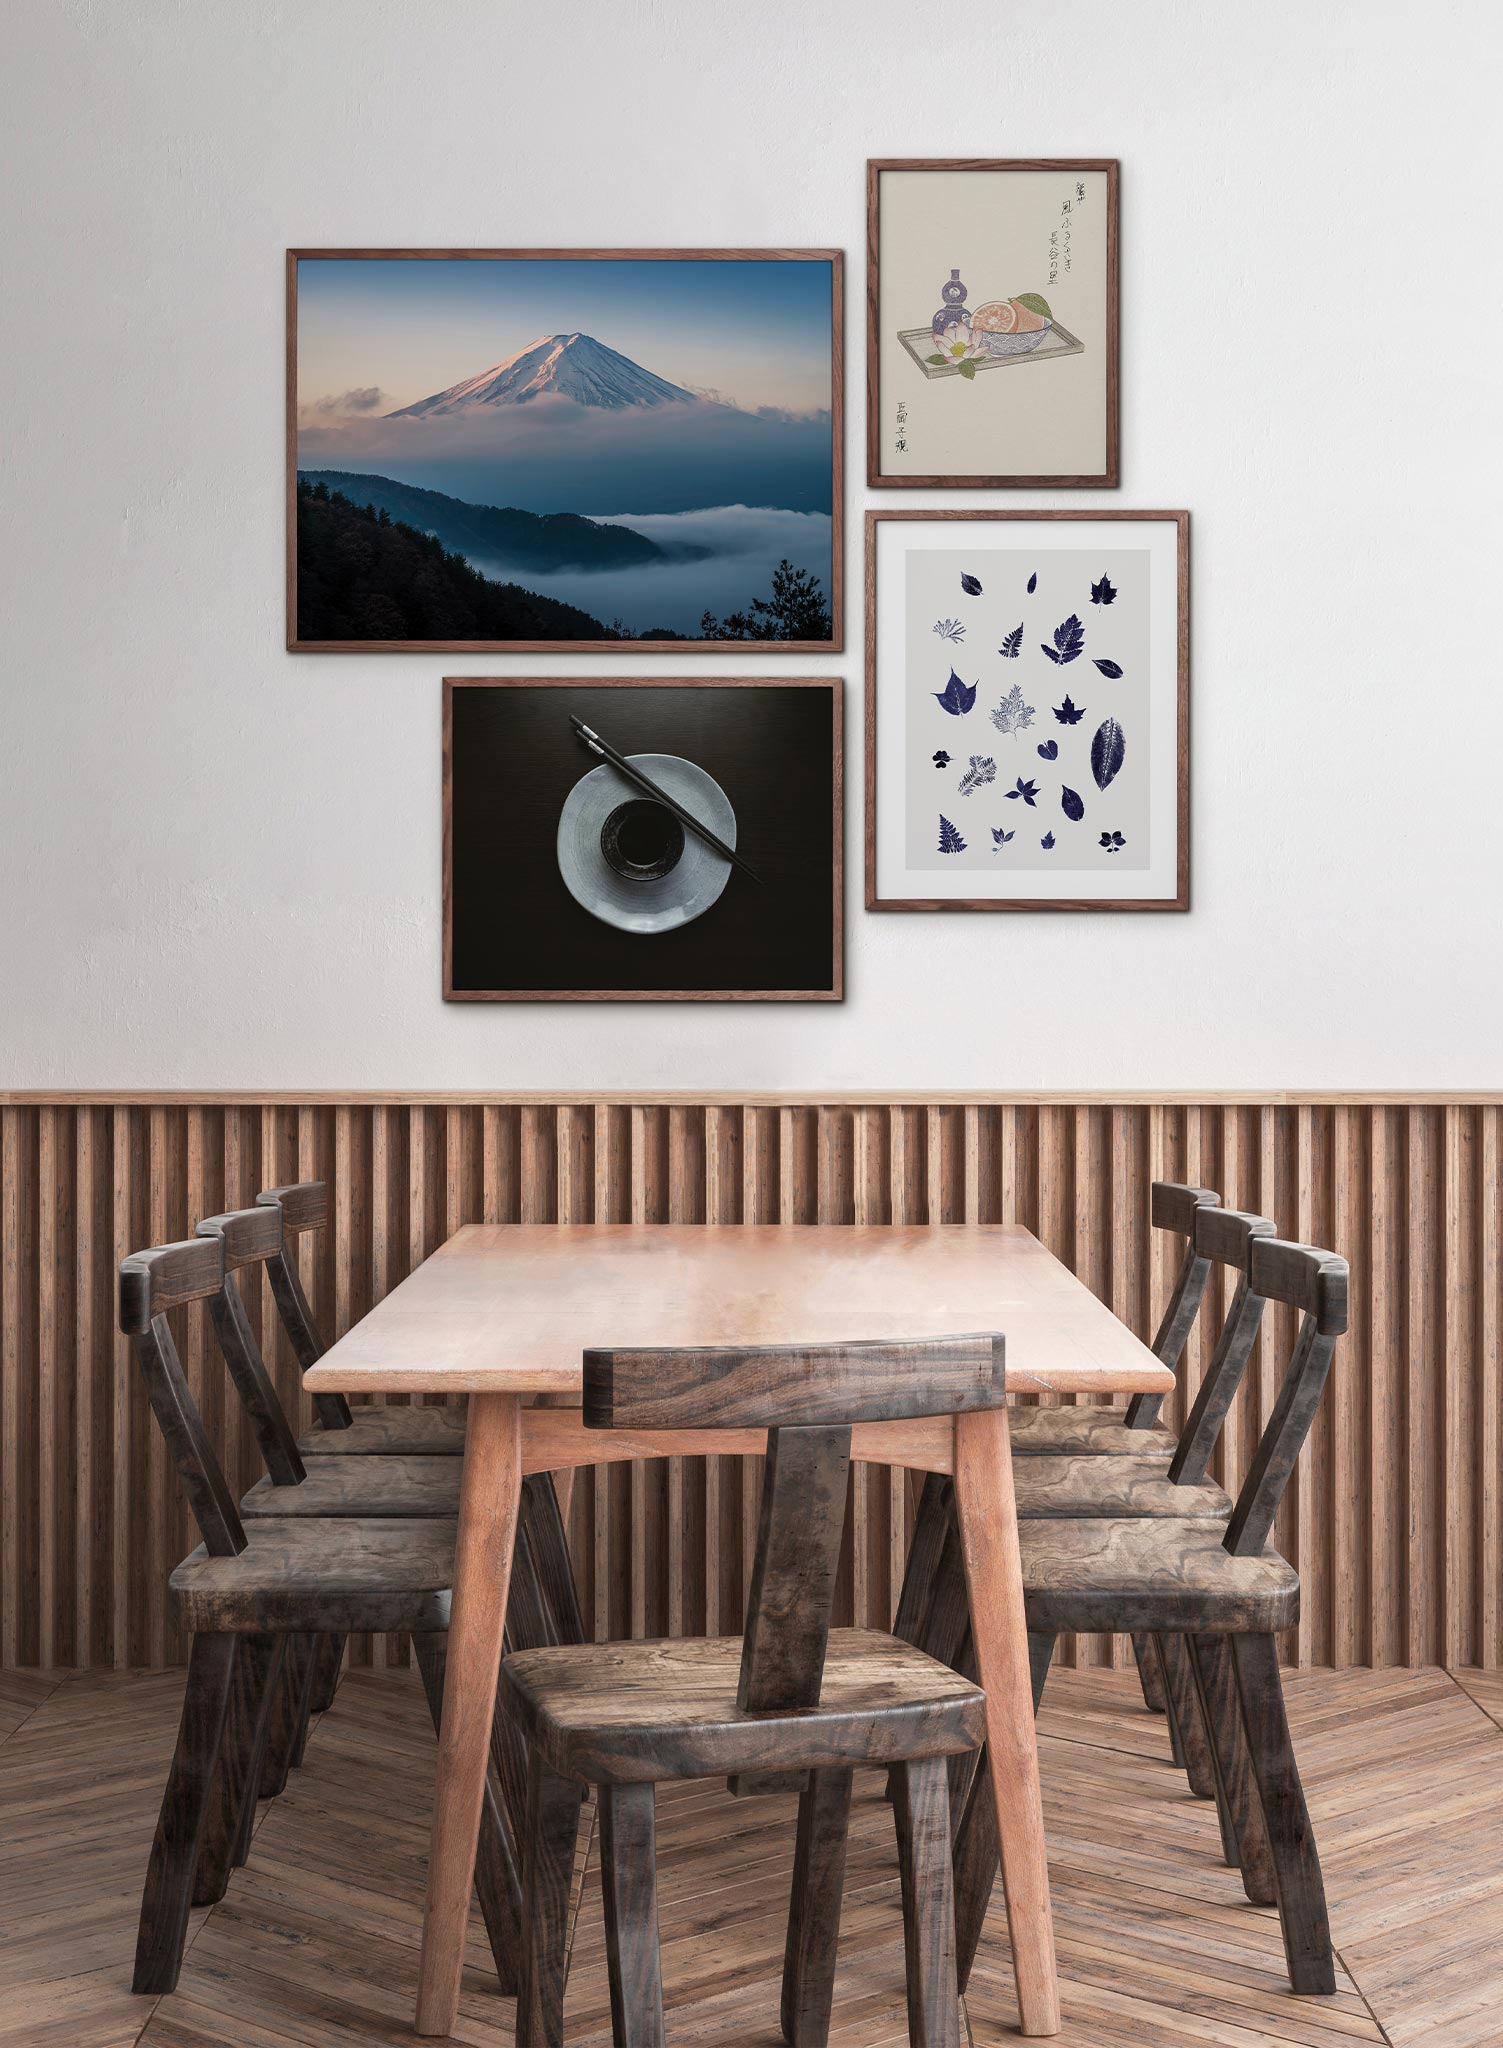 Japanese Summit is a minimalist photography by Opposite Wall of a breathtaking and ethereal view of Mount Fuji.